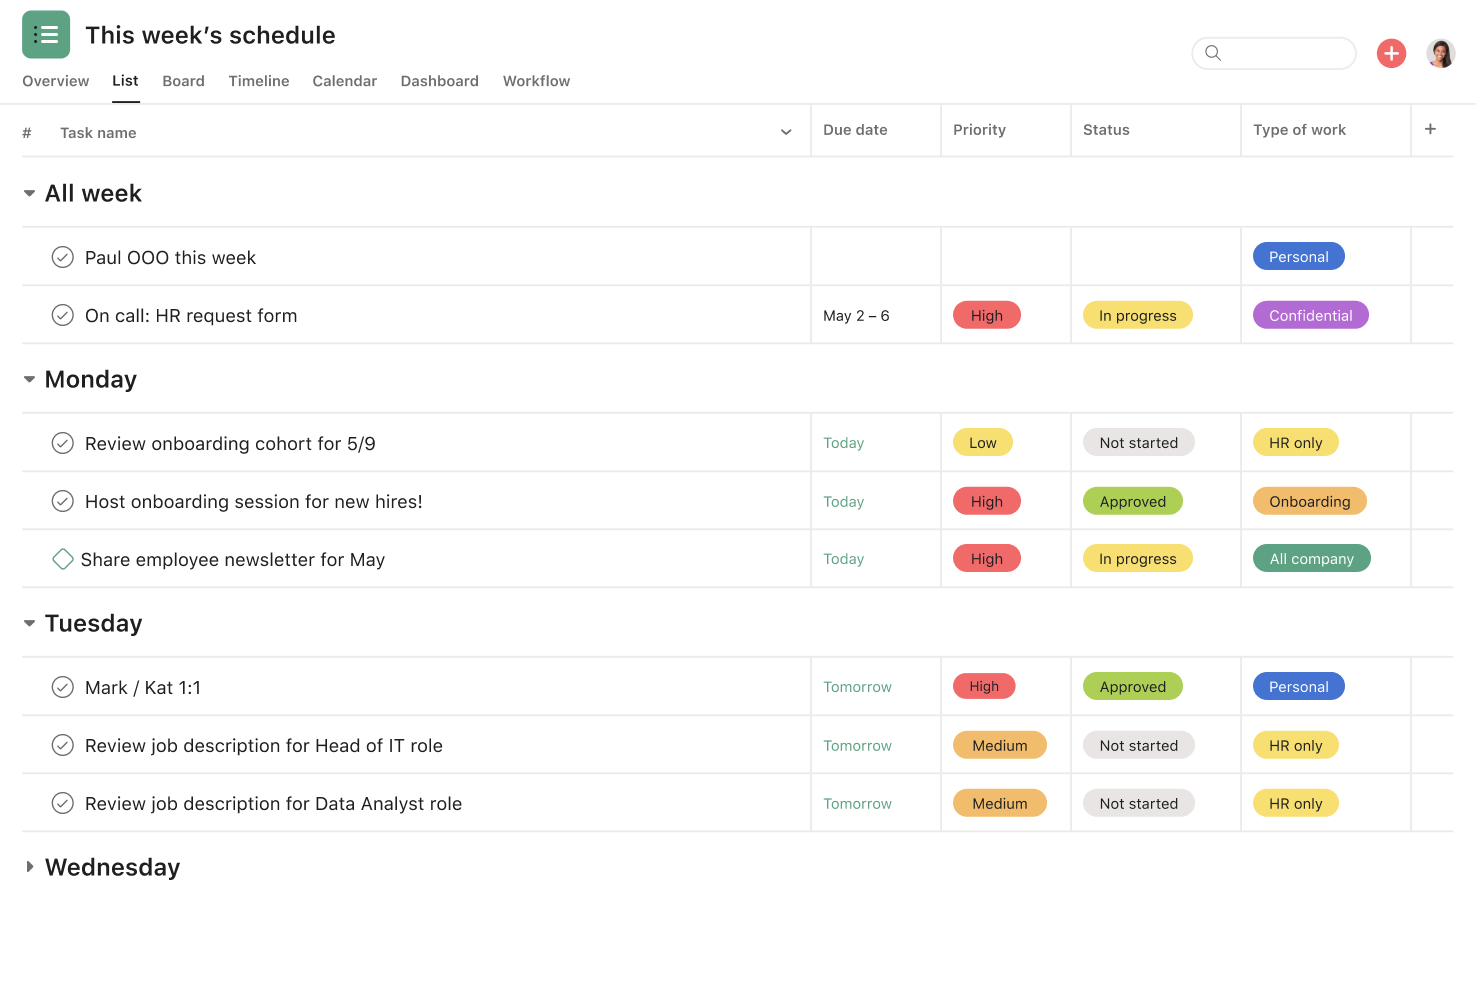 [Product ui] Weekly schedule sorted by priority, status, and type of work (list view)